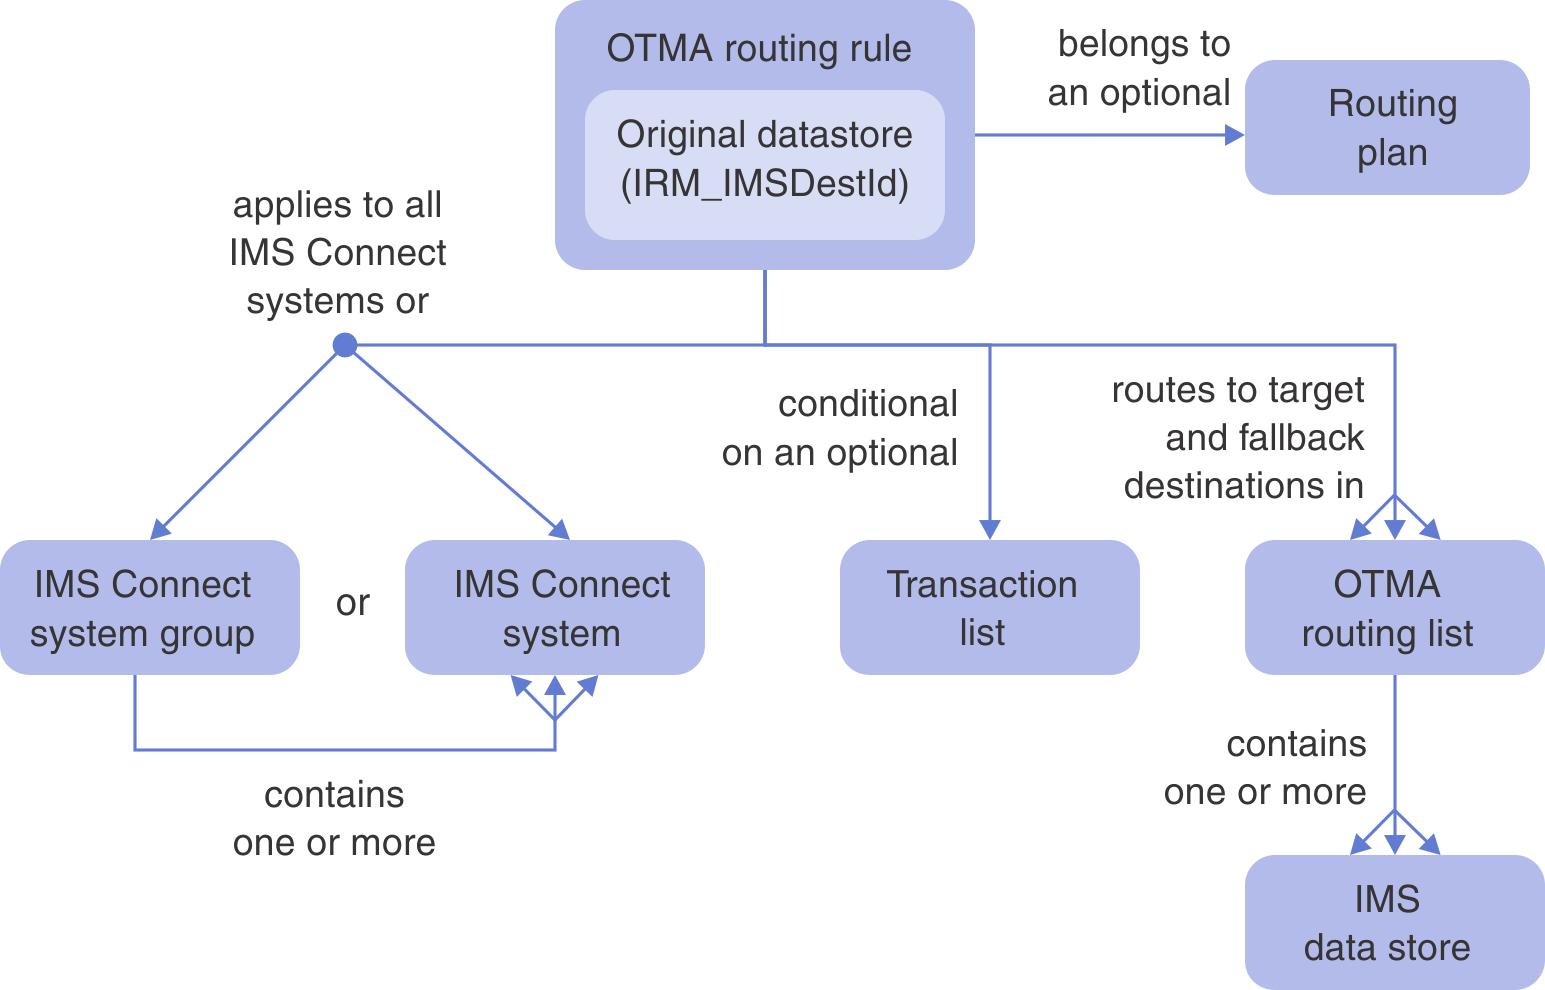 OTMA routing rules defined in IMS Connect Extensions route messages destined for the IMS data store in the IRM_IMSDestId field in the IRM message to target and fallback destinations in an OTMA routing list containing one or more IMS data stores. OTMA routing rules apply to either an IMS Connect system or a group of systems and can be made conditional on an optional list of transactions. OTMA routing rules may belong to a routing plan.